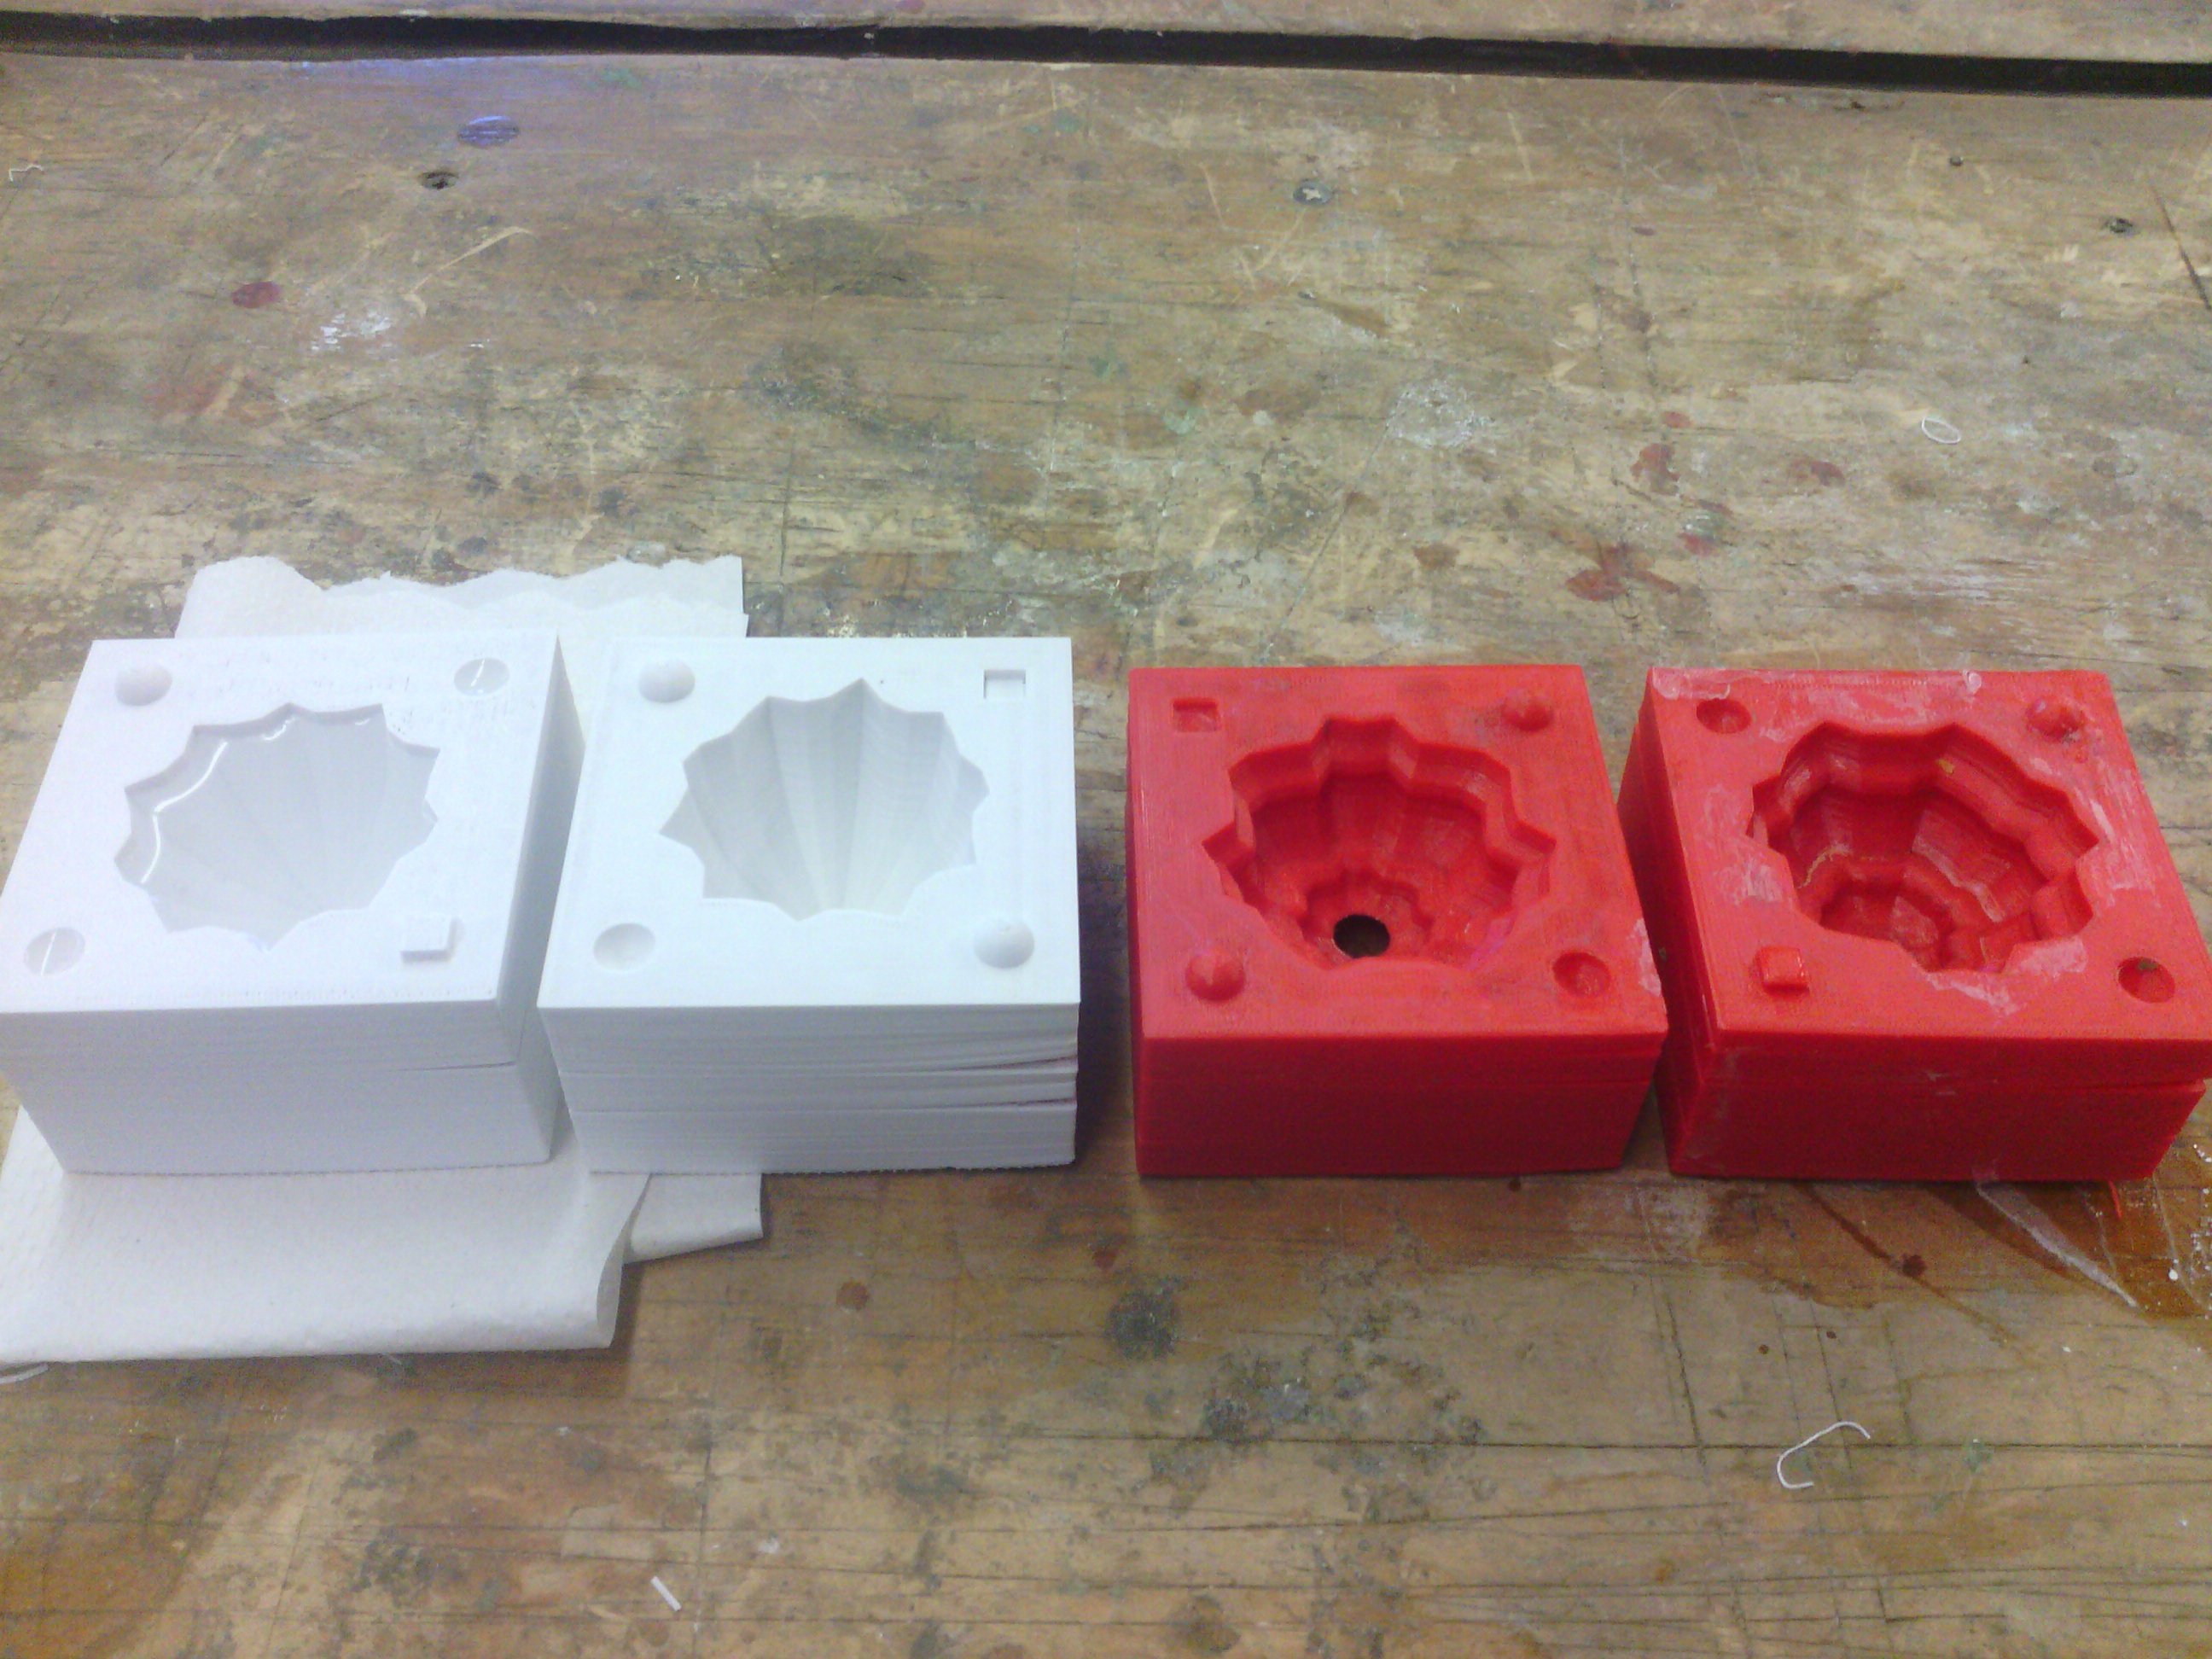 More experiments with 3D-printed two-part molds; refining the mold-generating and casting processes